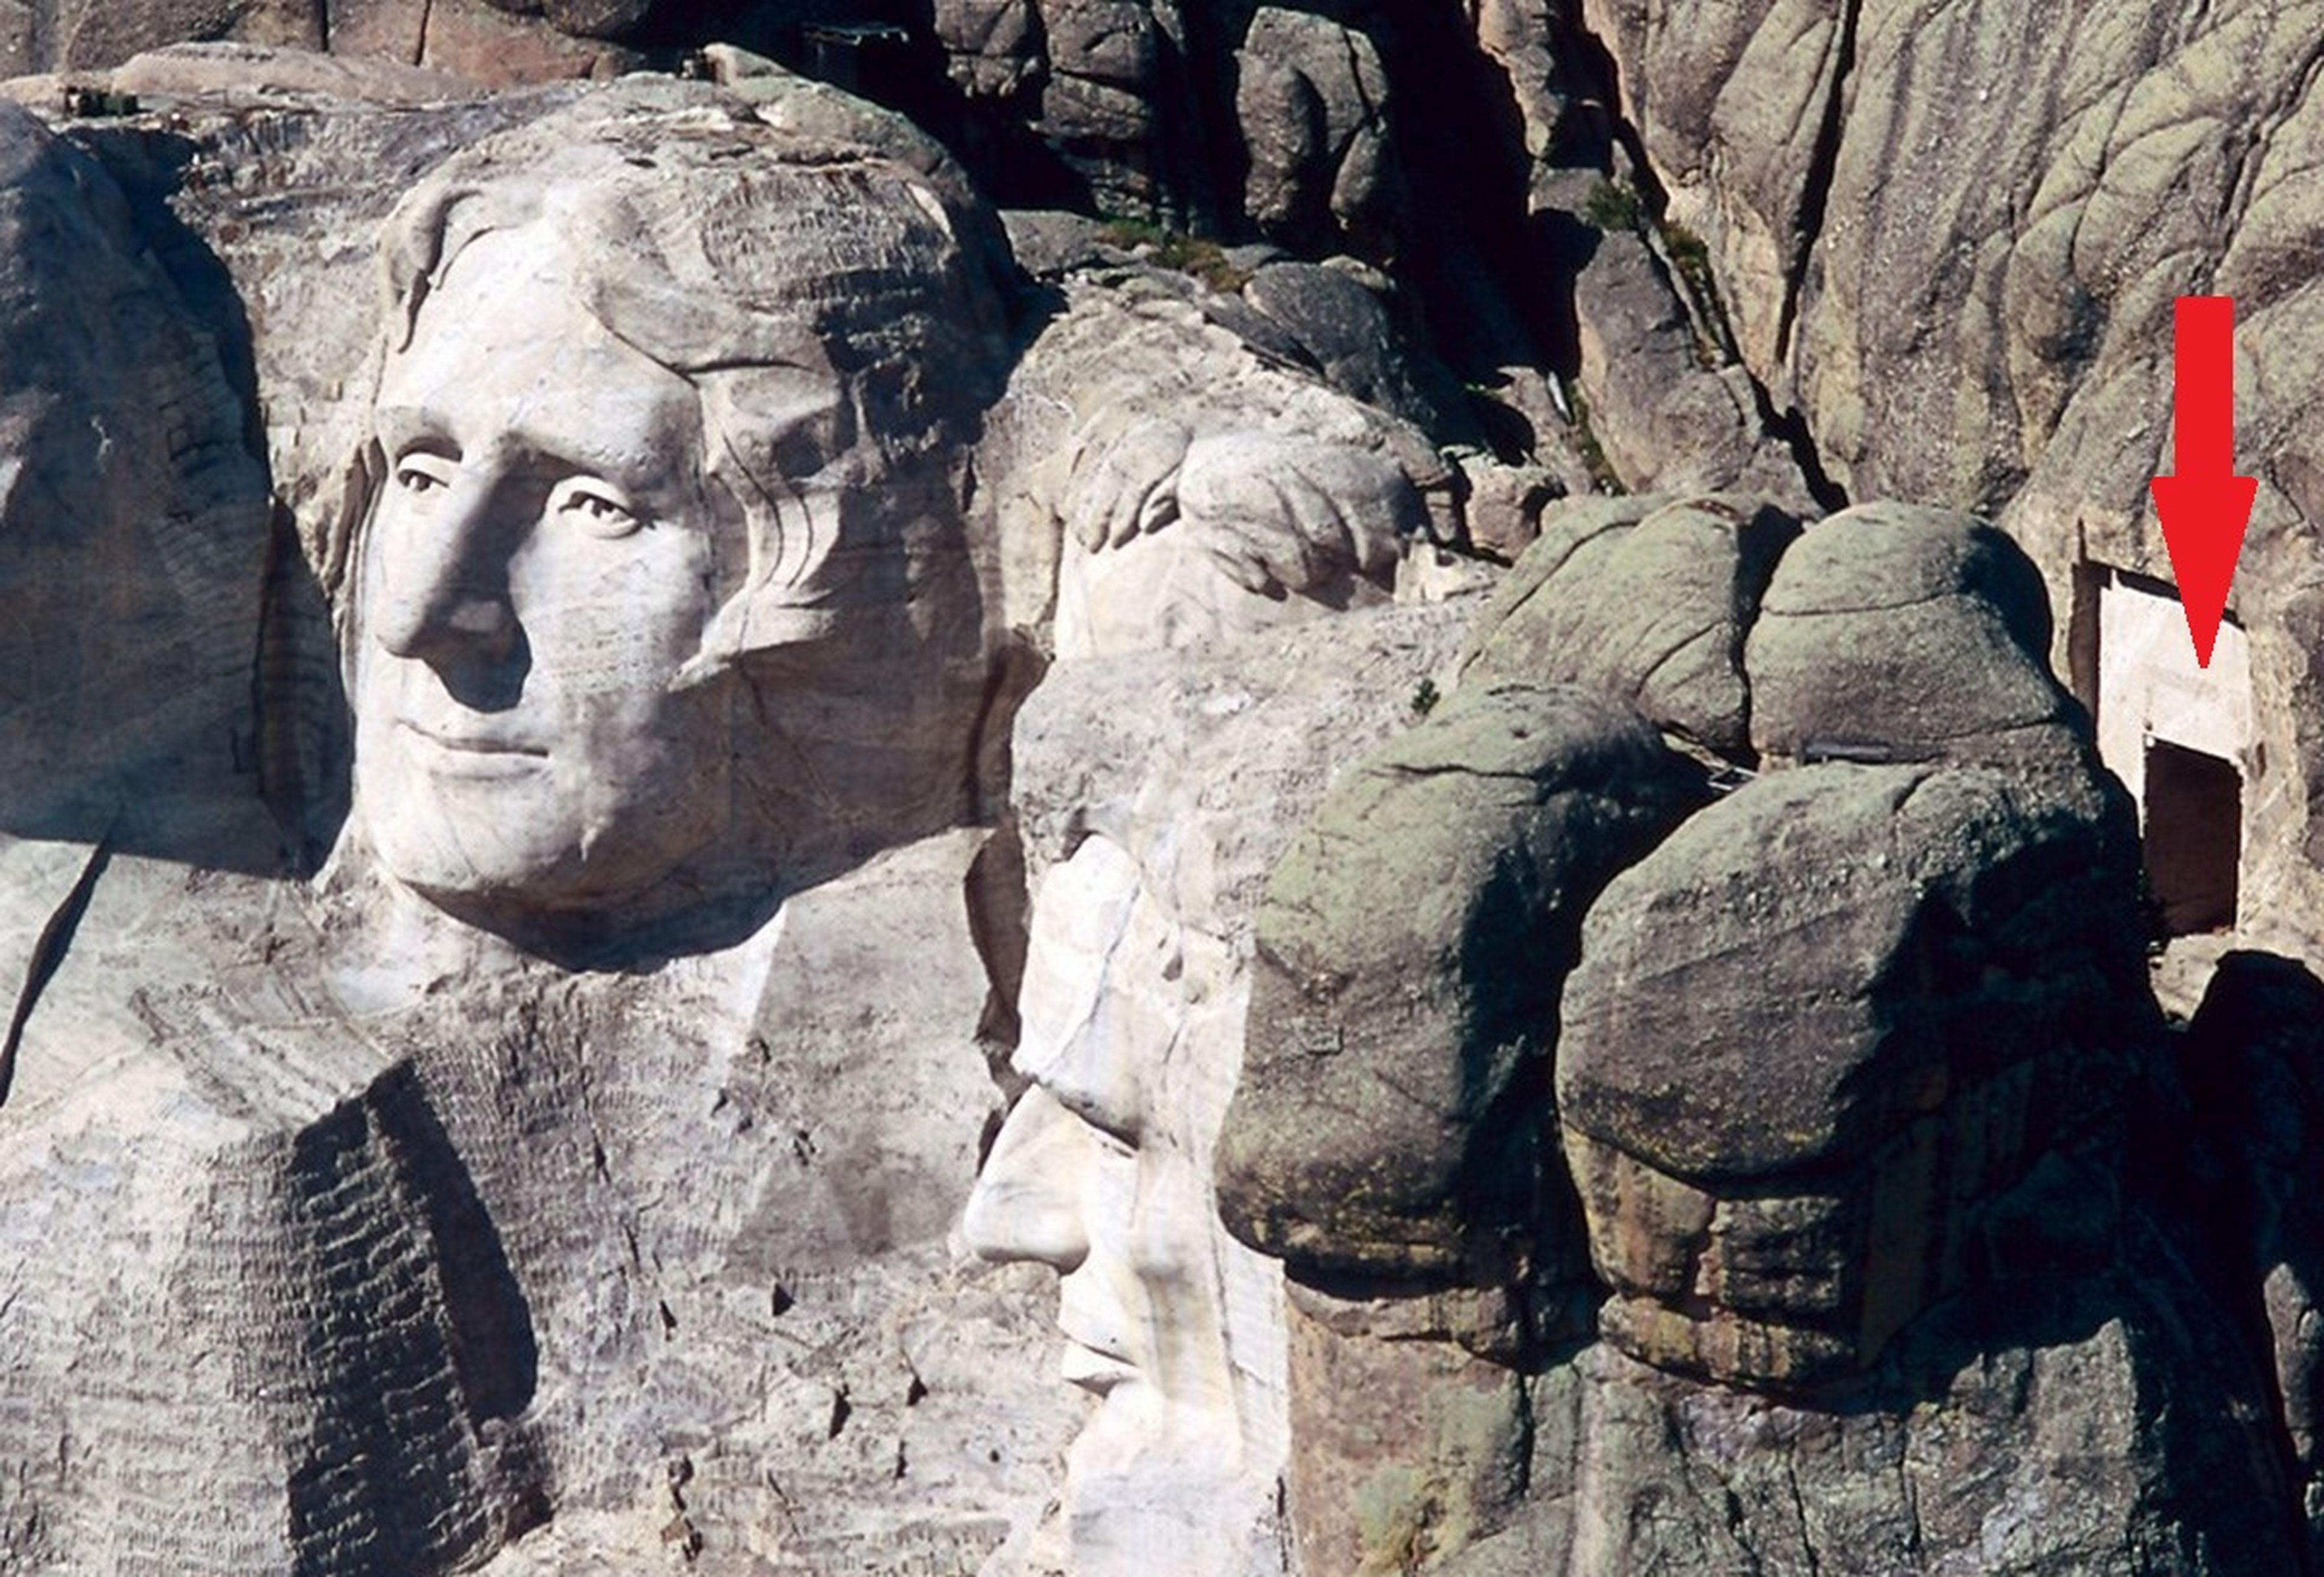 What hides the hidden camera behind the heads of Mount Rushmore?